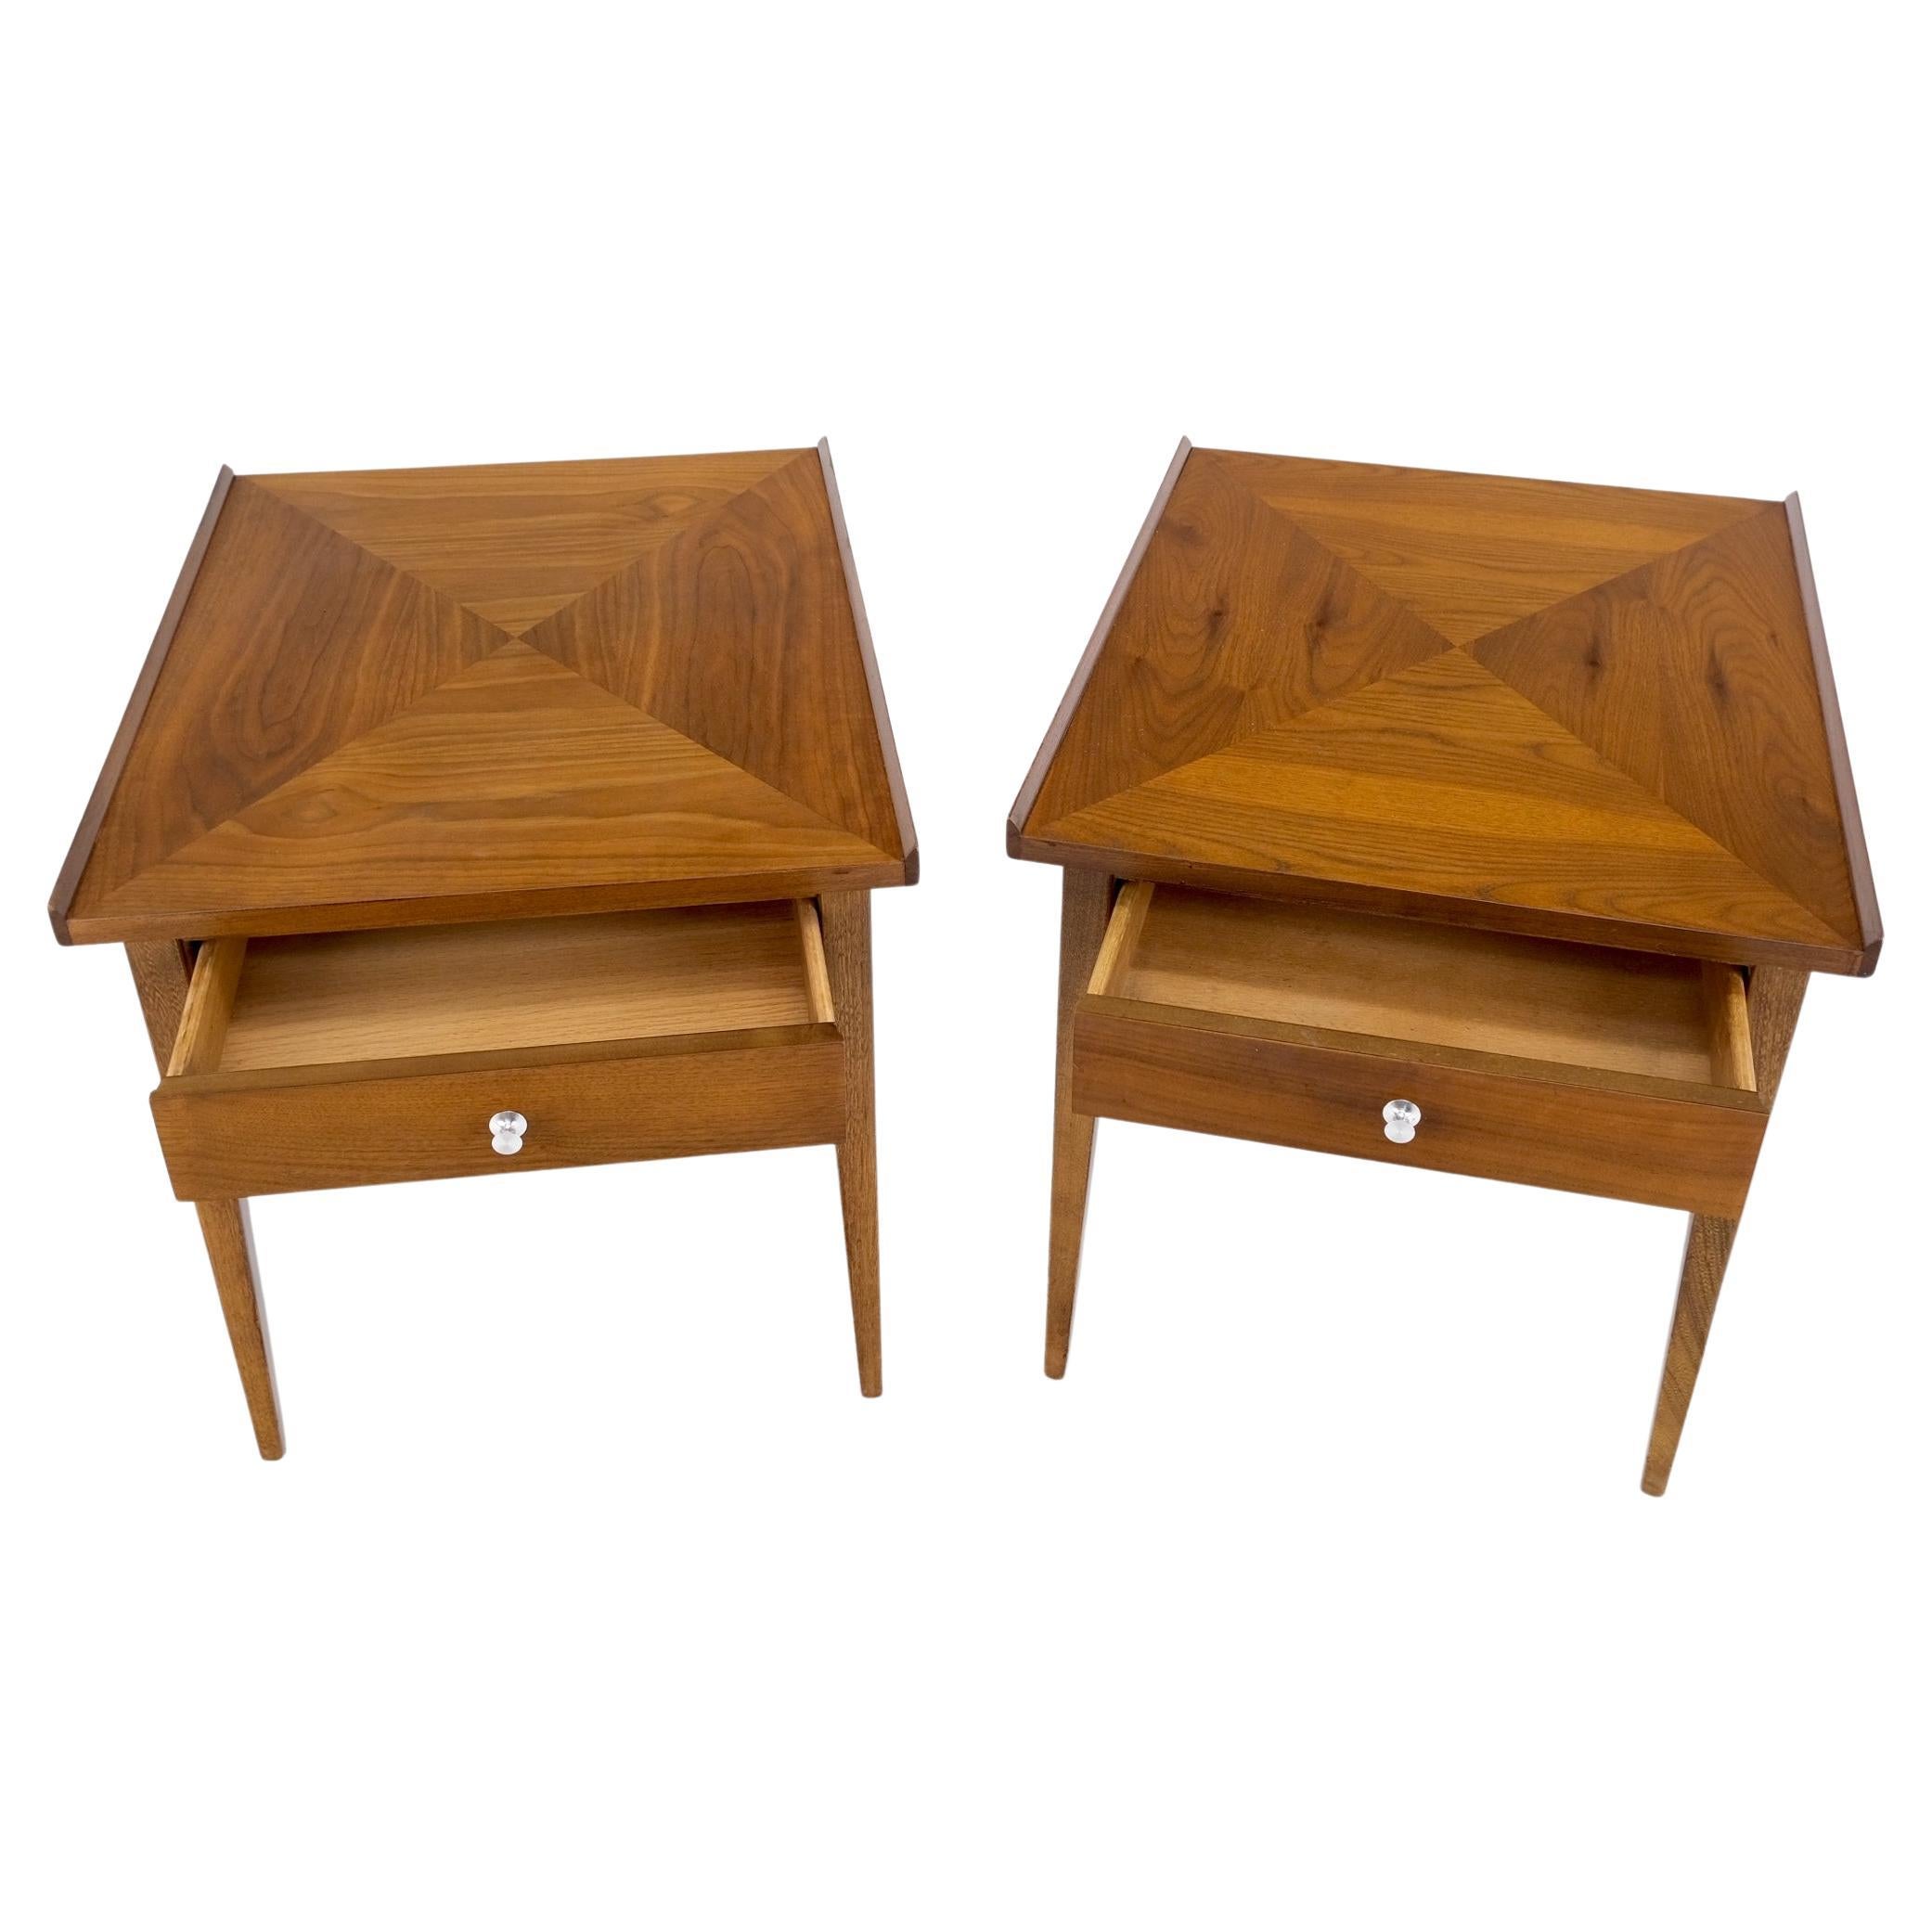 Pair of Walnut Rolled Edges Square One Drawer Tapered Legs End Side Tables Stand